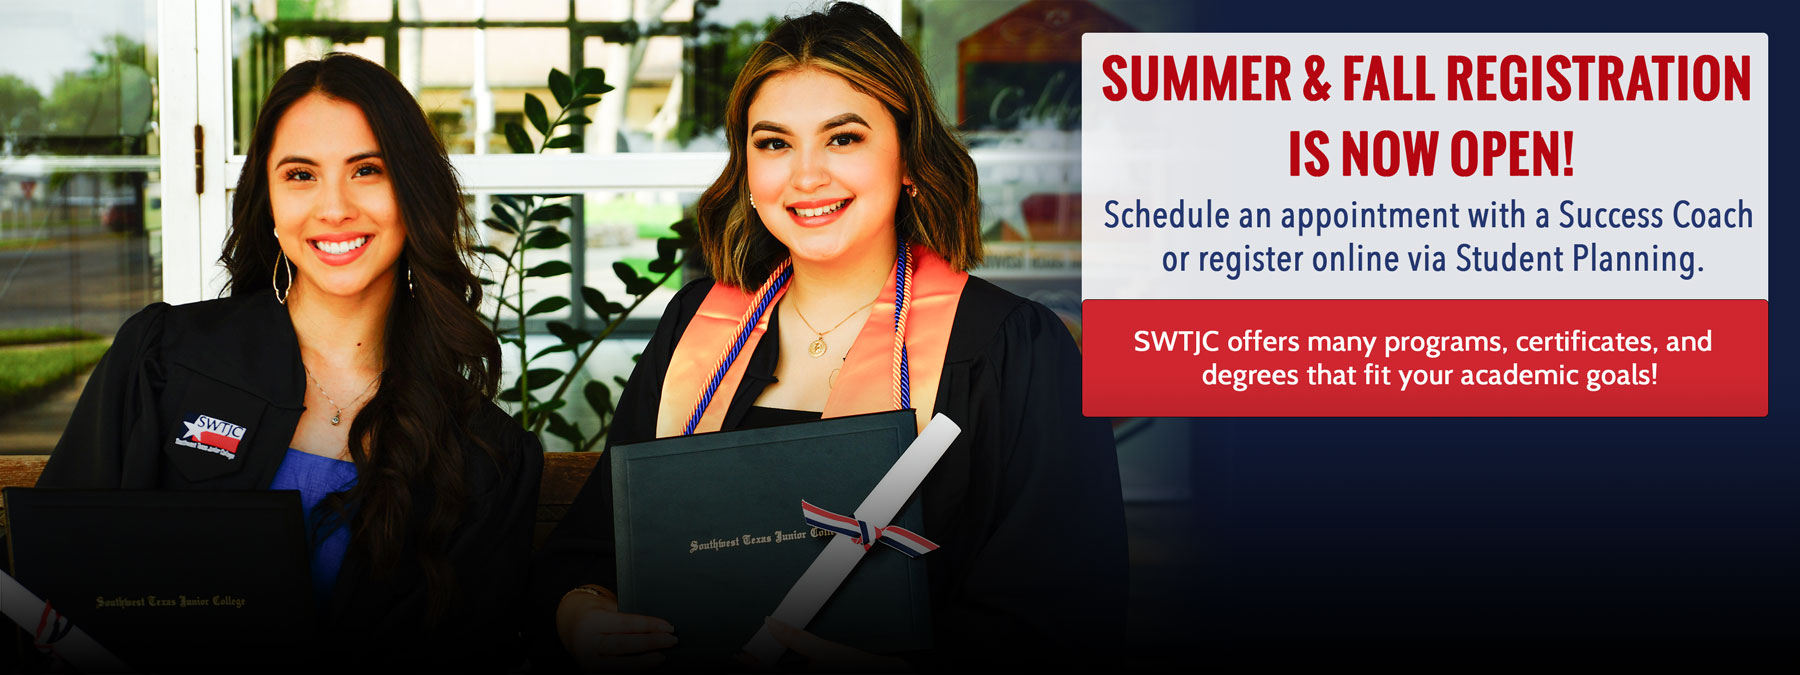 Two graduates sitting on a bench wearing their graduation regalia holding a diploma. Informative text: Summer & Fall Registration is now open! Schedule an appointment with a Success Coach or register online via Student Planning. SWTJC offers many programs, certificates, and degrees that fit your academic goals!